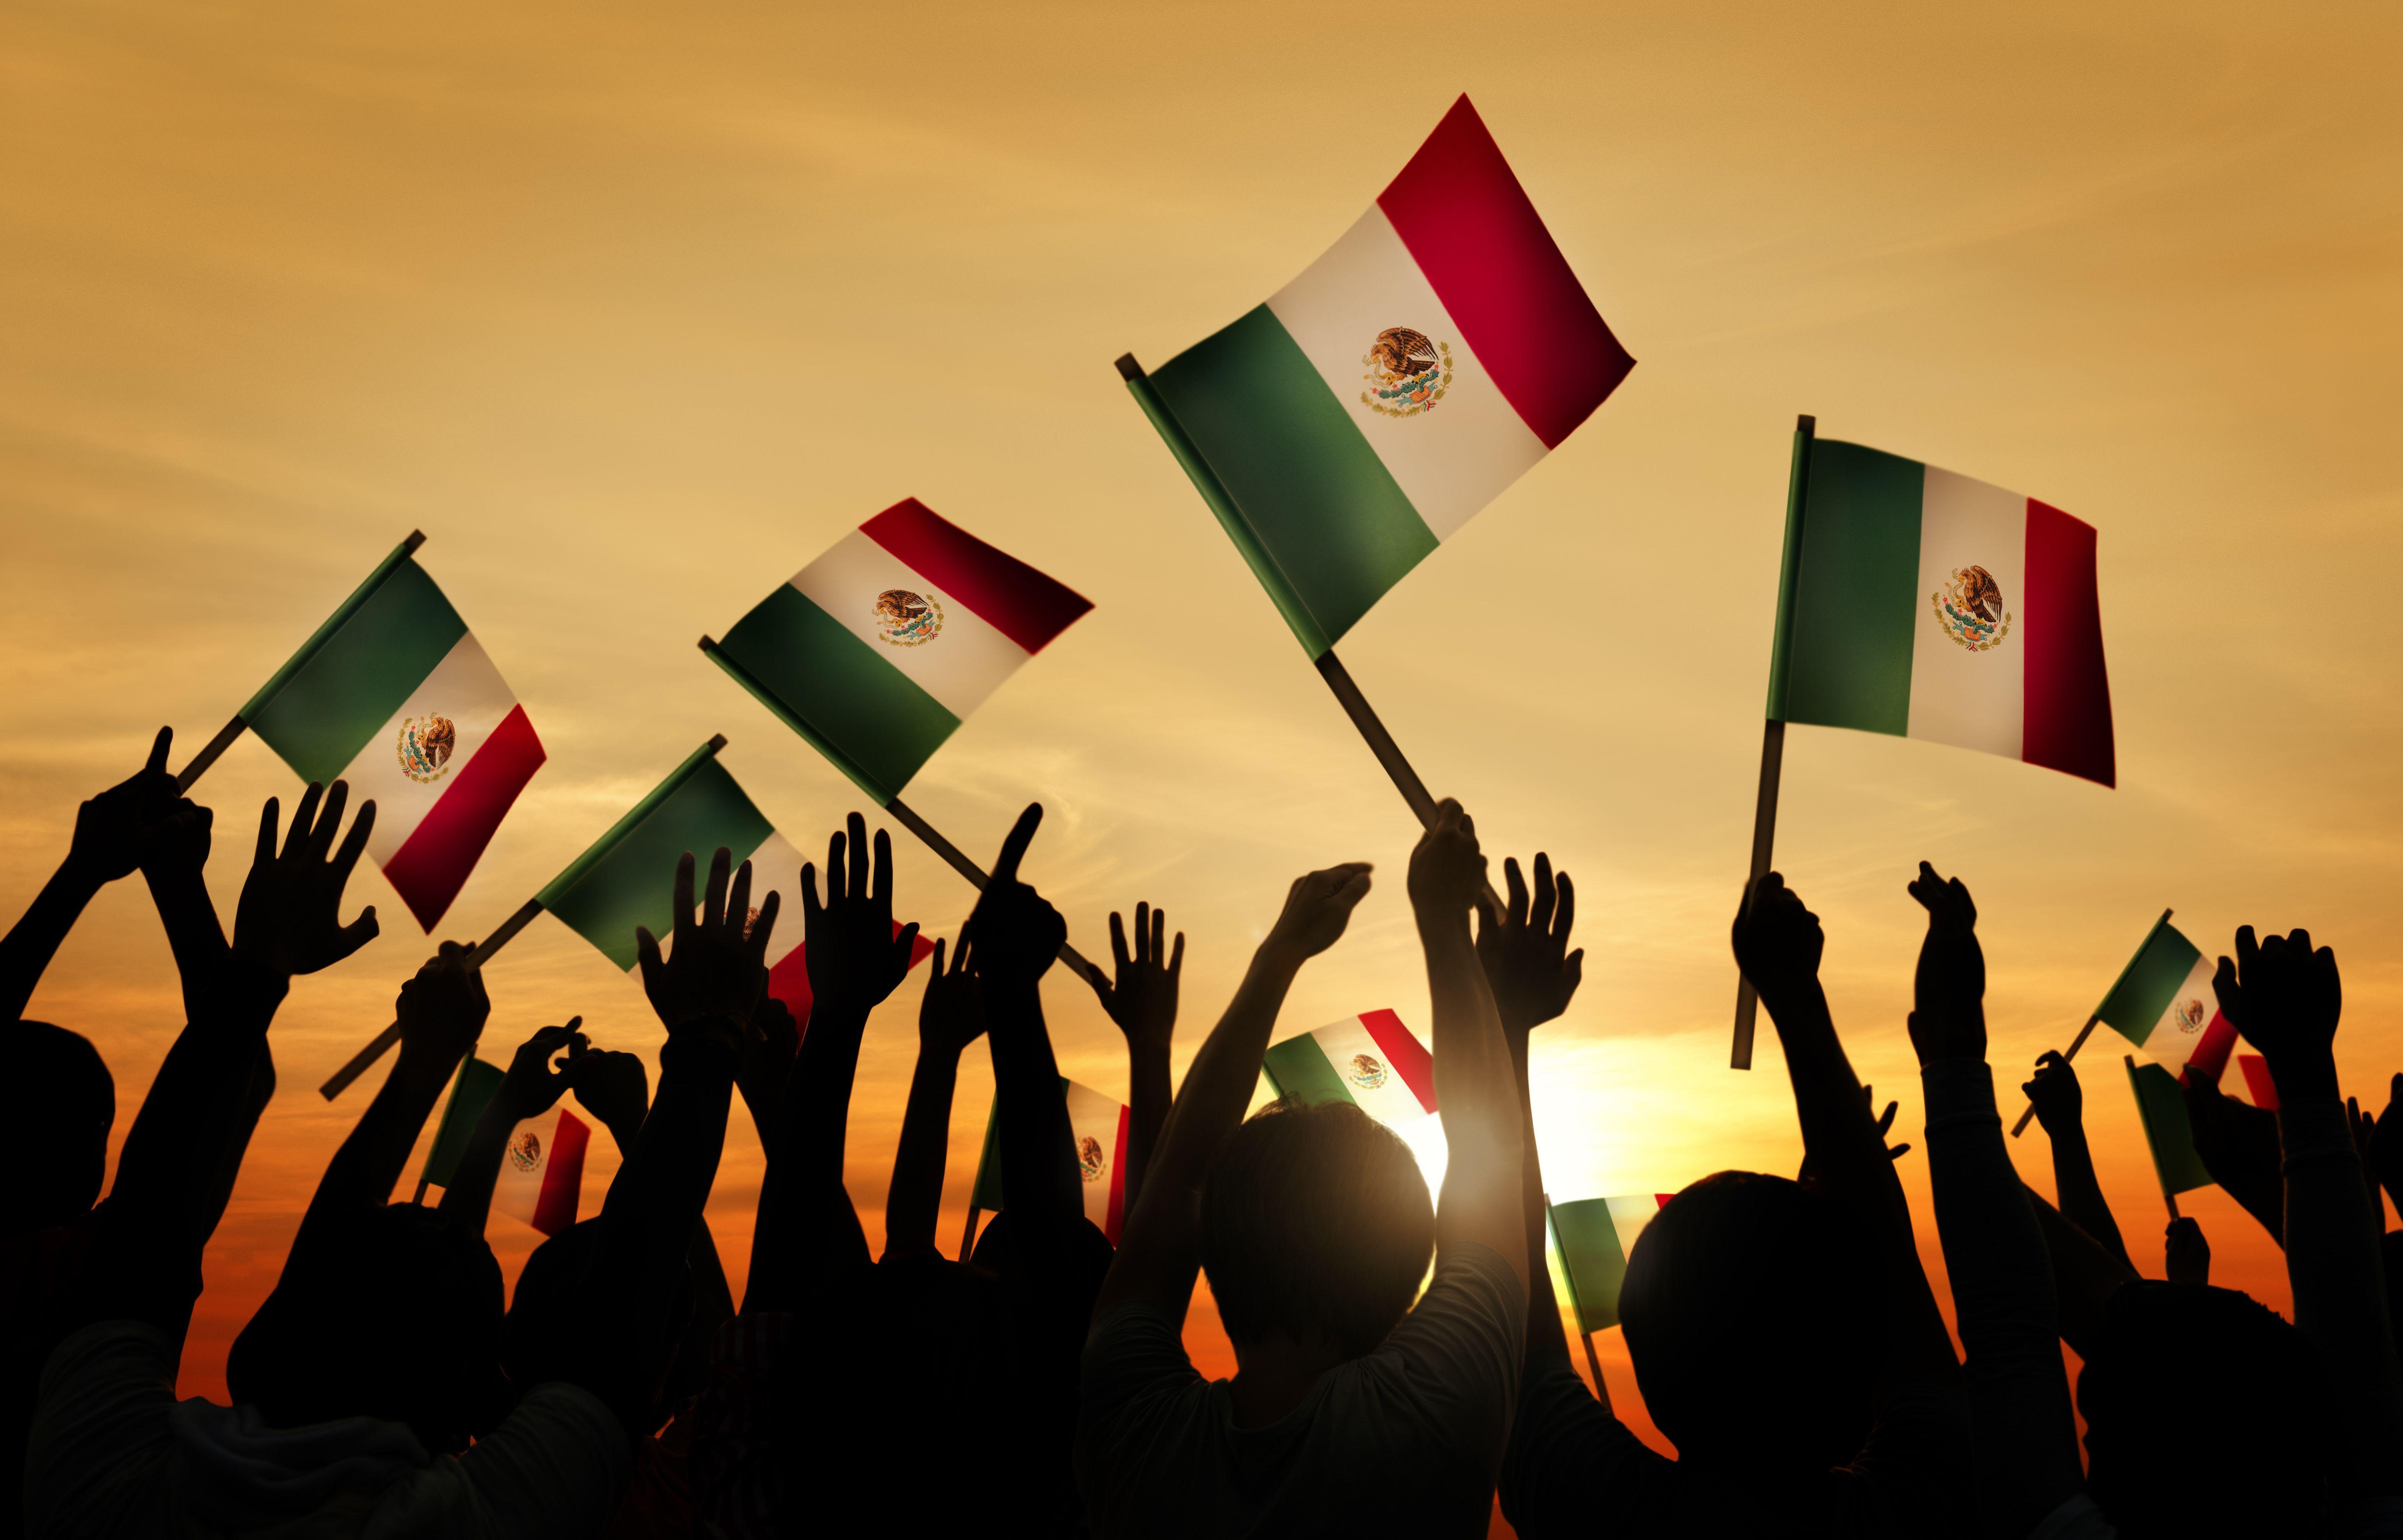 Mexican Independence Day Wallpapers Wallpaper Cave